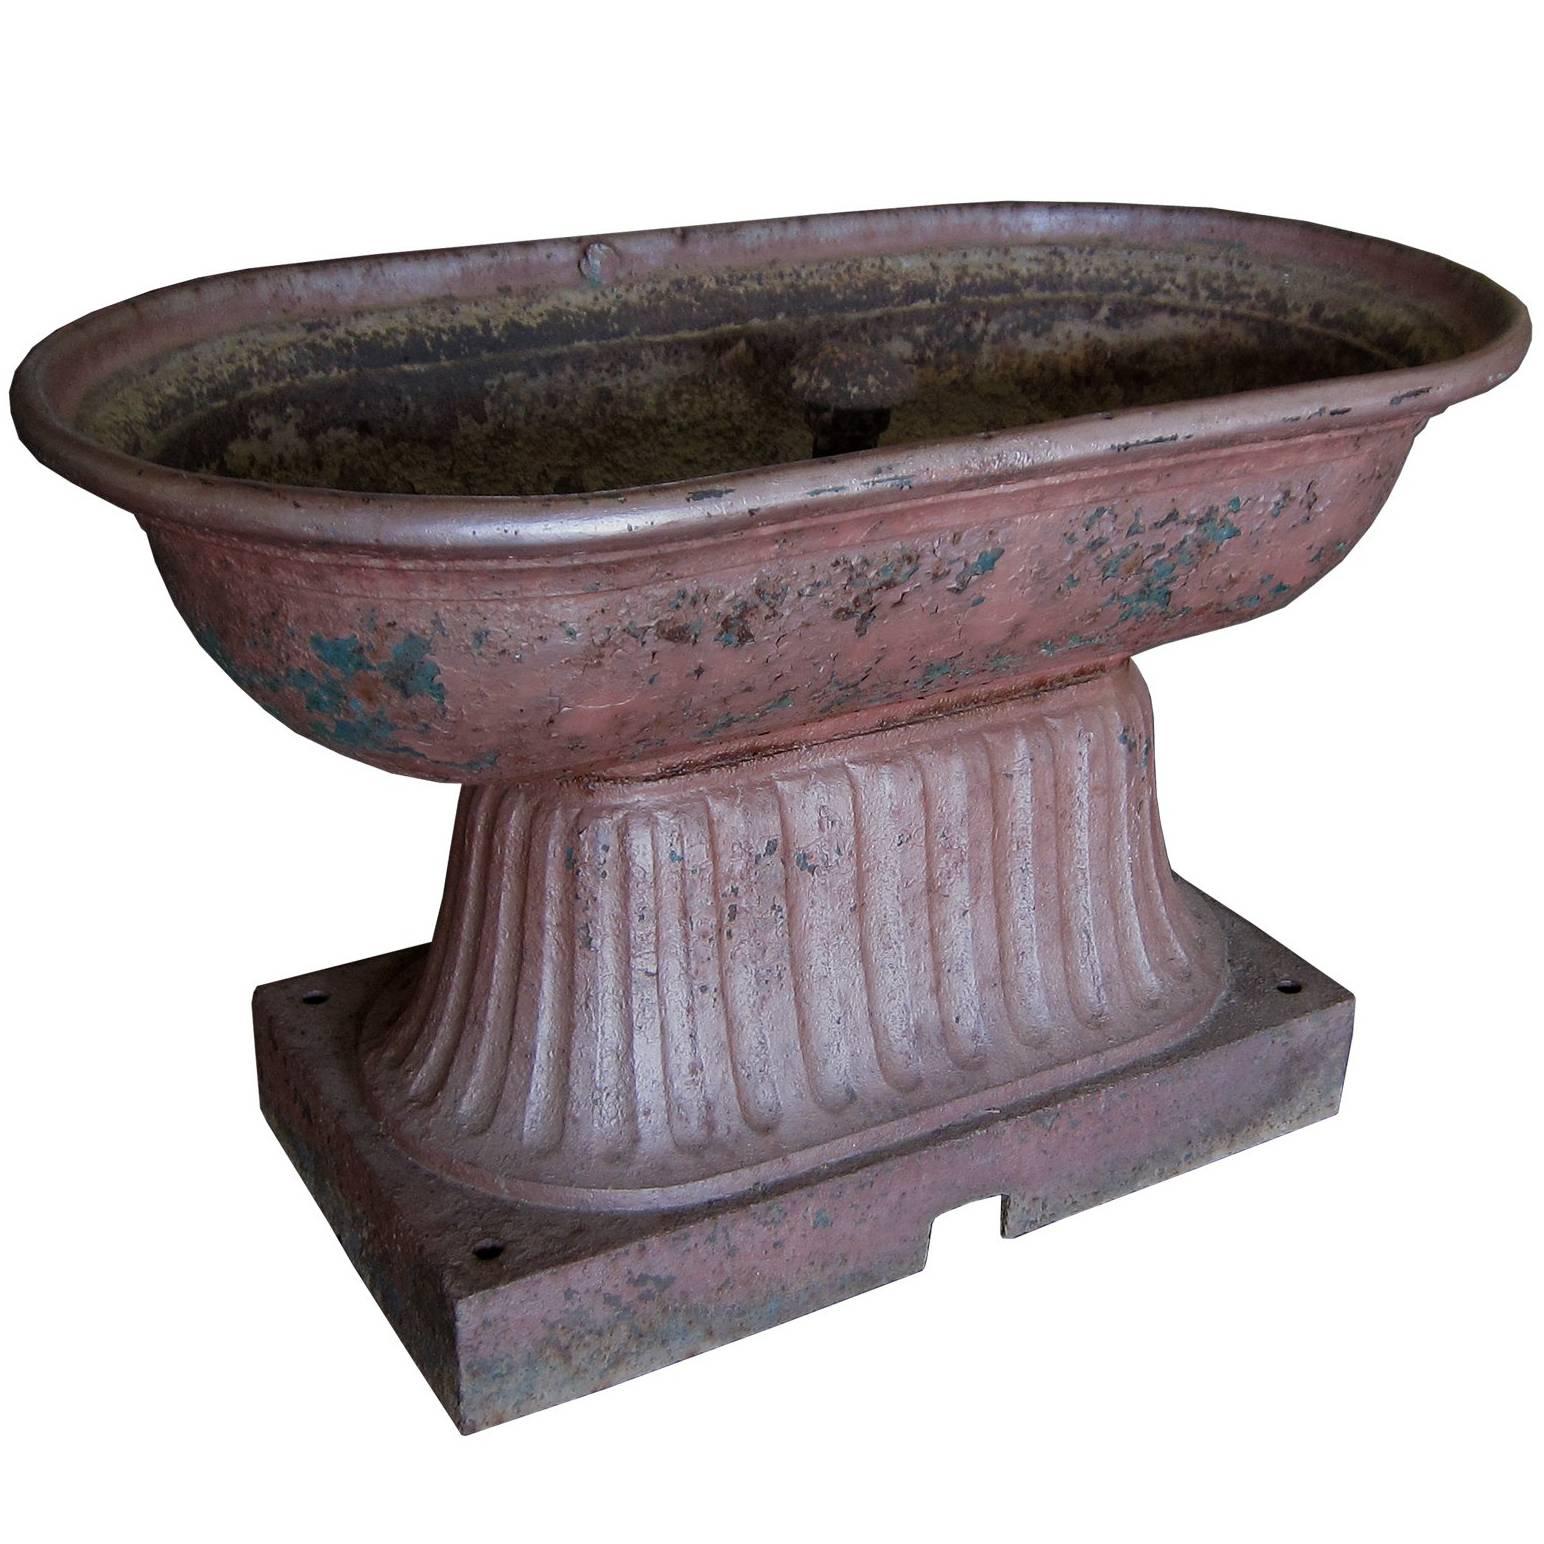 19th-20th Century American Painted Iron Horse Trough